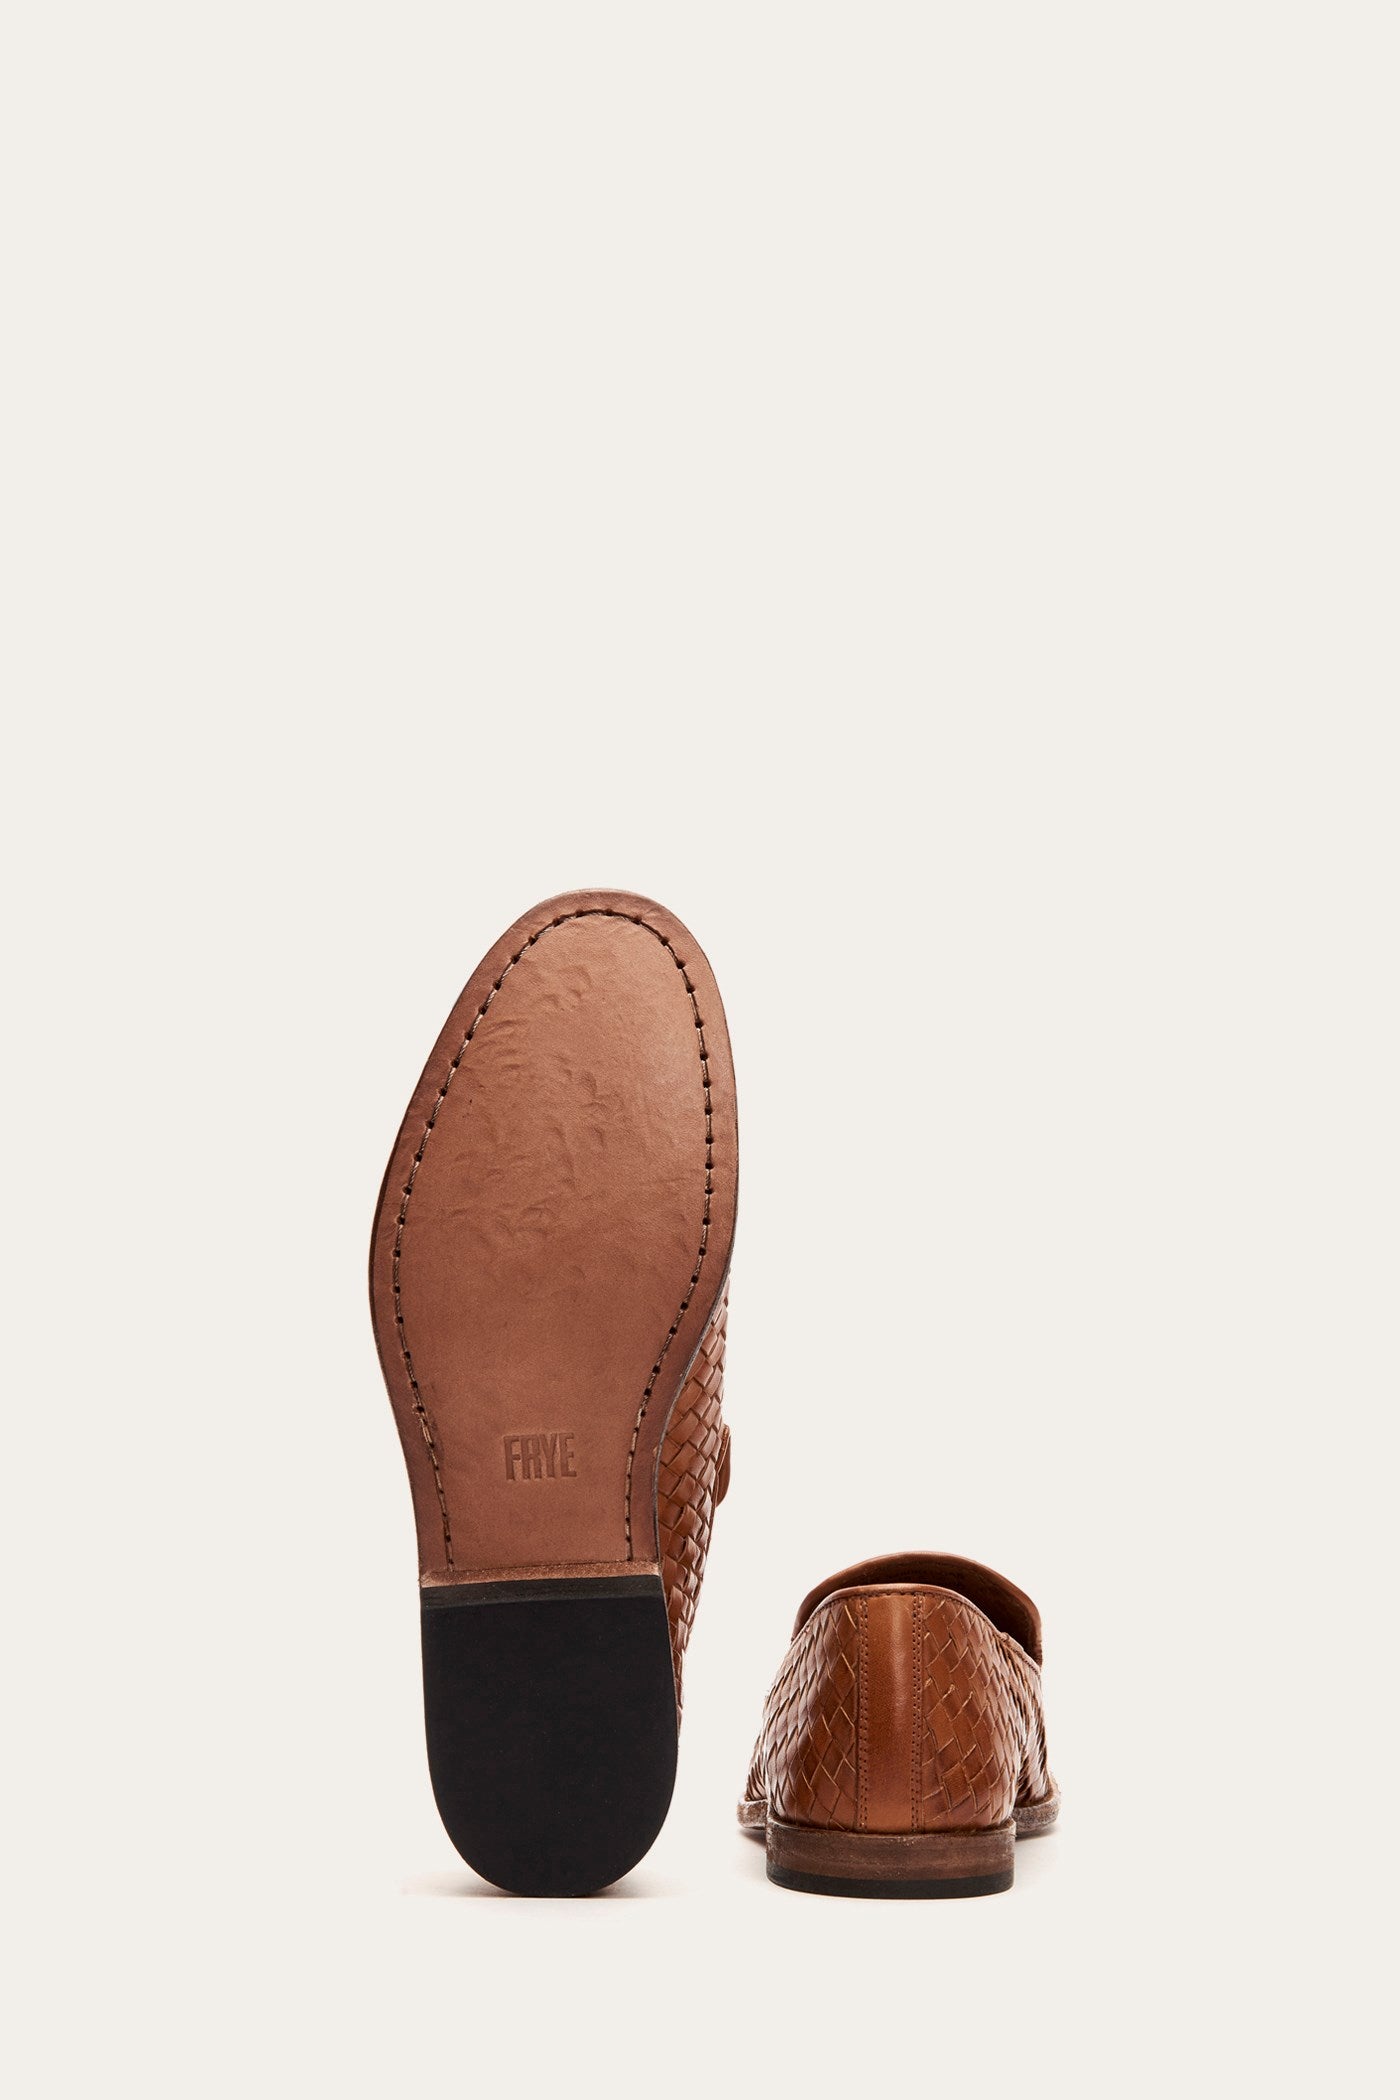 frye loafers mens